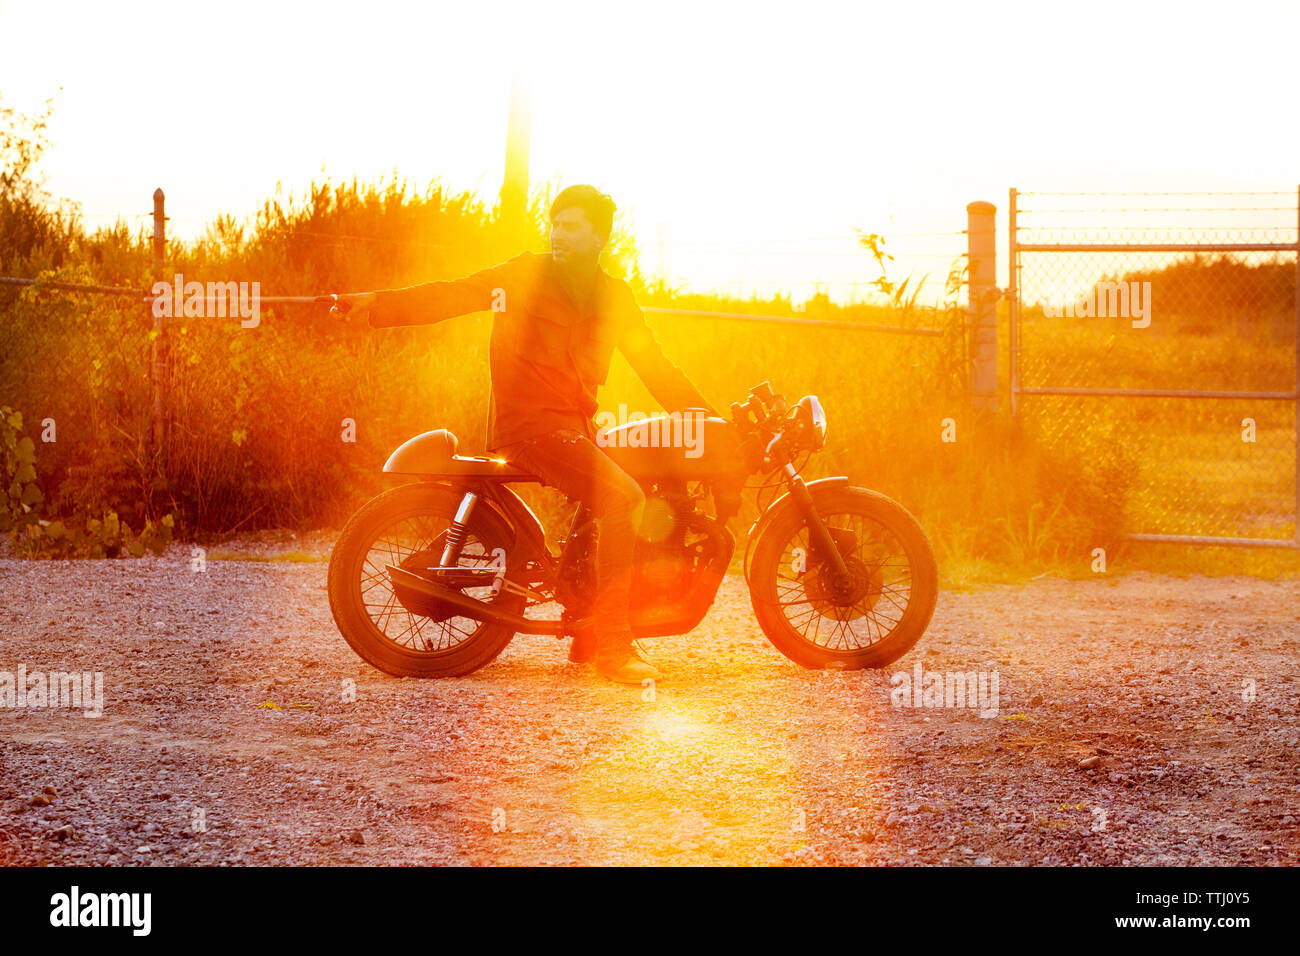 Man pointing while sitting on motorcycle against clear sky Stock Photo